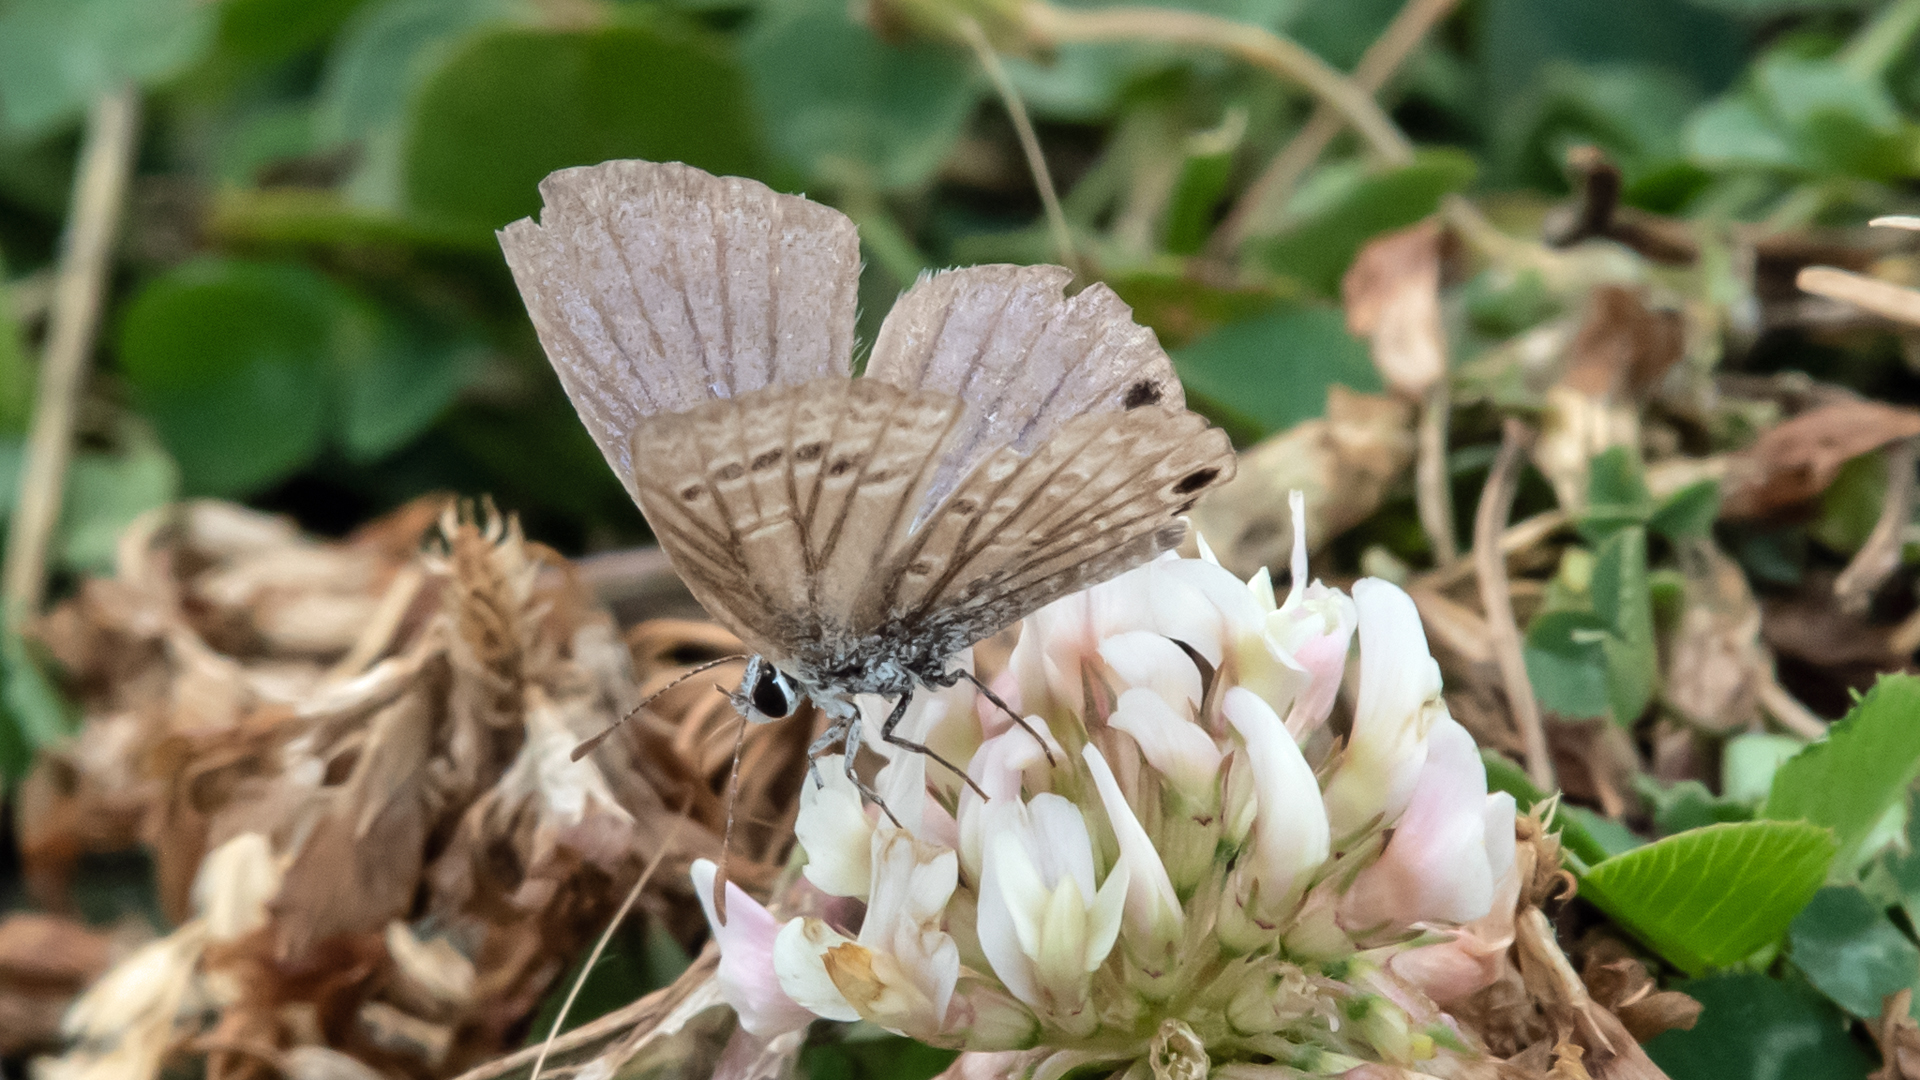 Male (worn) on white clover, Valles Caldera National Preserve, August 2023